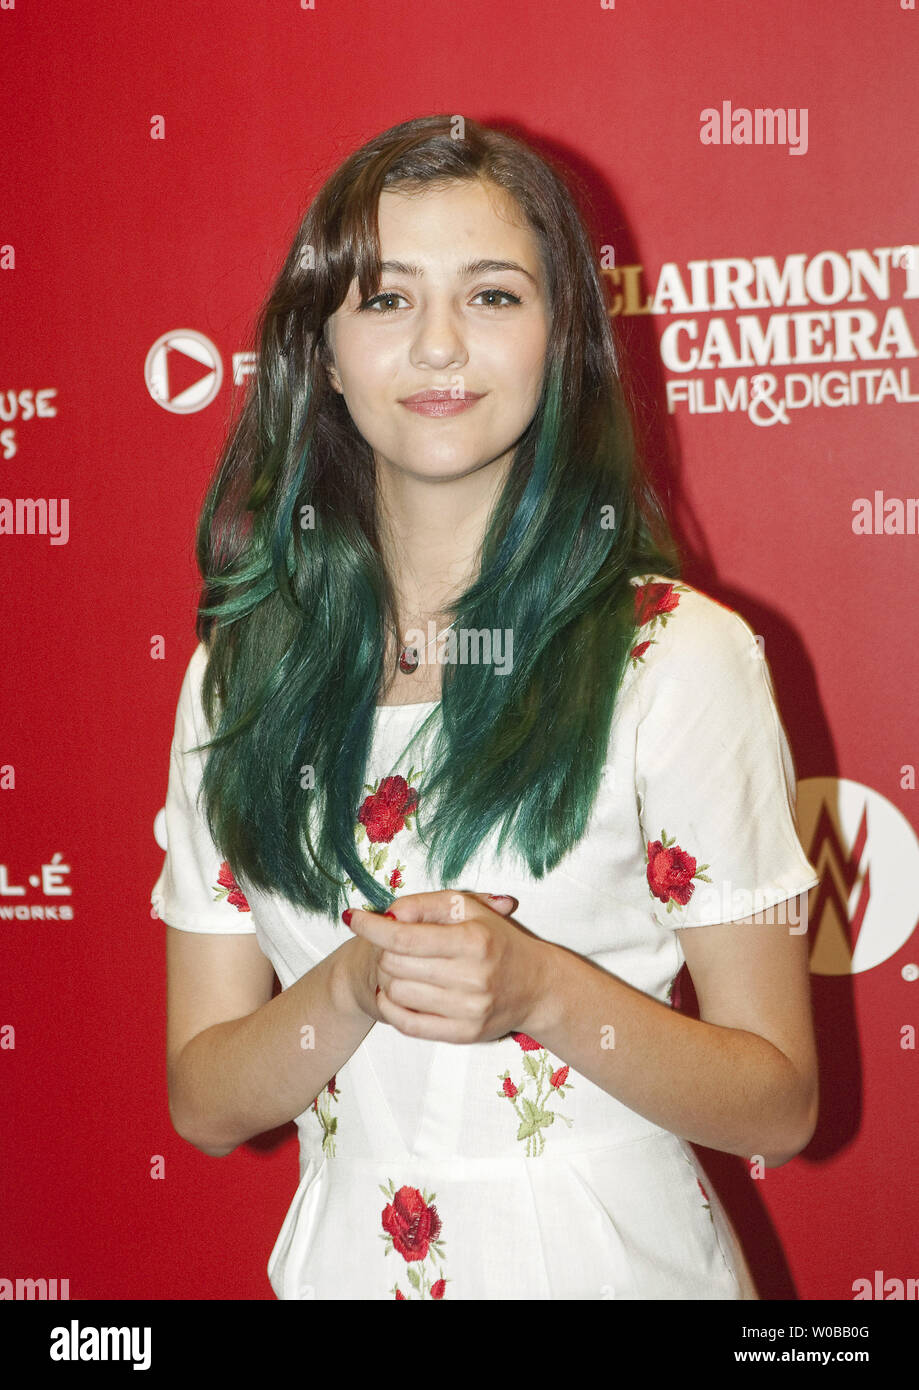 Actress Katie Findlay arrives at the Lighthouse Pictures and JetSet Crew Film Party at the Sutton Place Hotel during the Vancouver International Film Festival in Vancouver, British Columbia on September 29, 2012. UPI Photo /Heinz Ruckemann Stock Photo